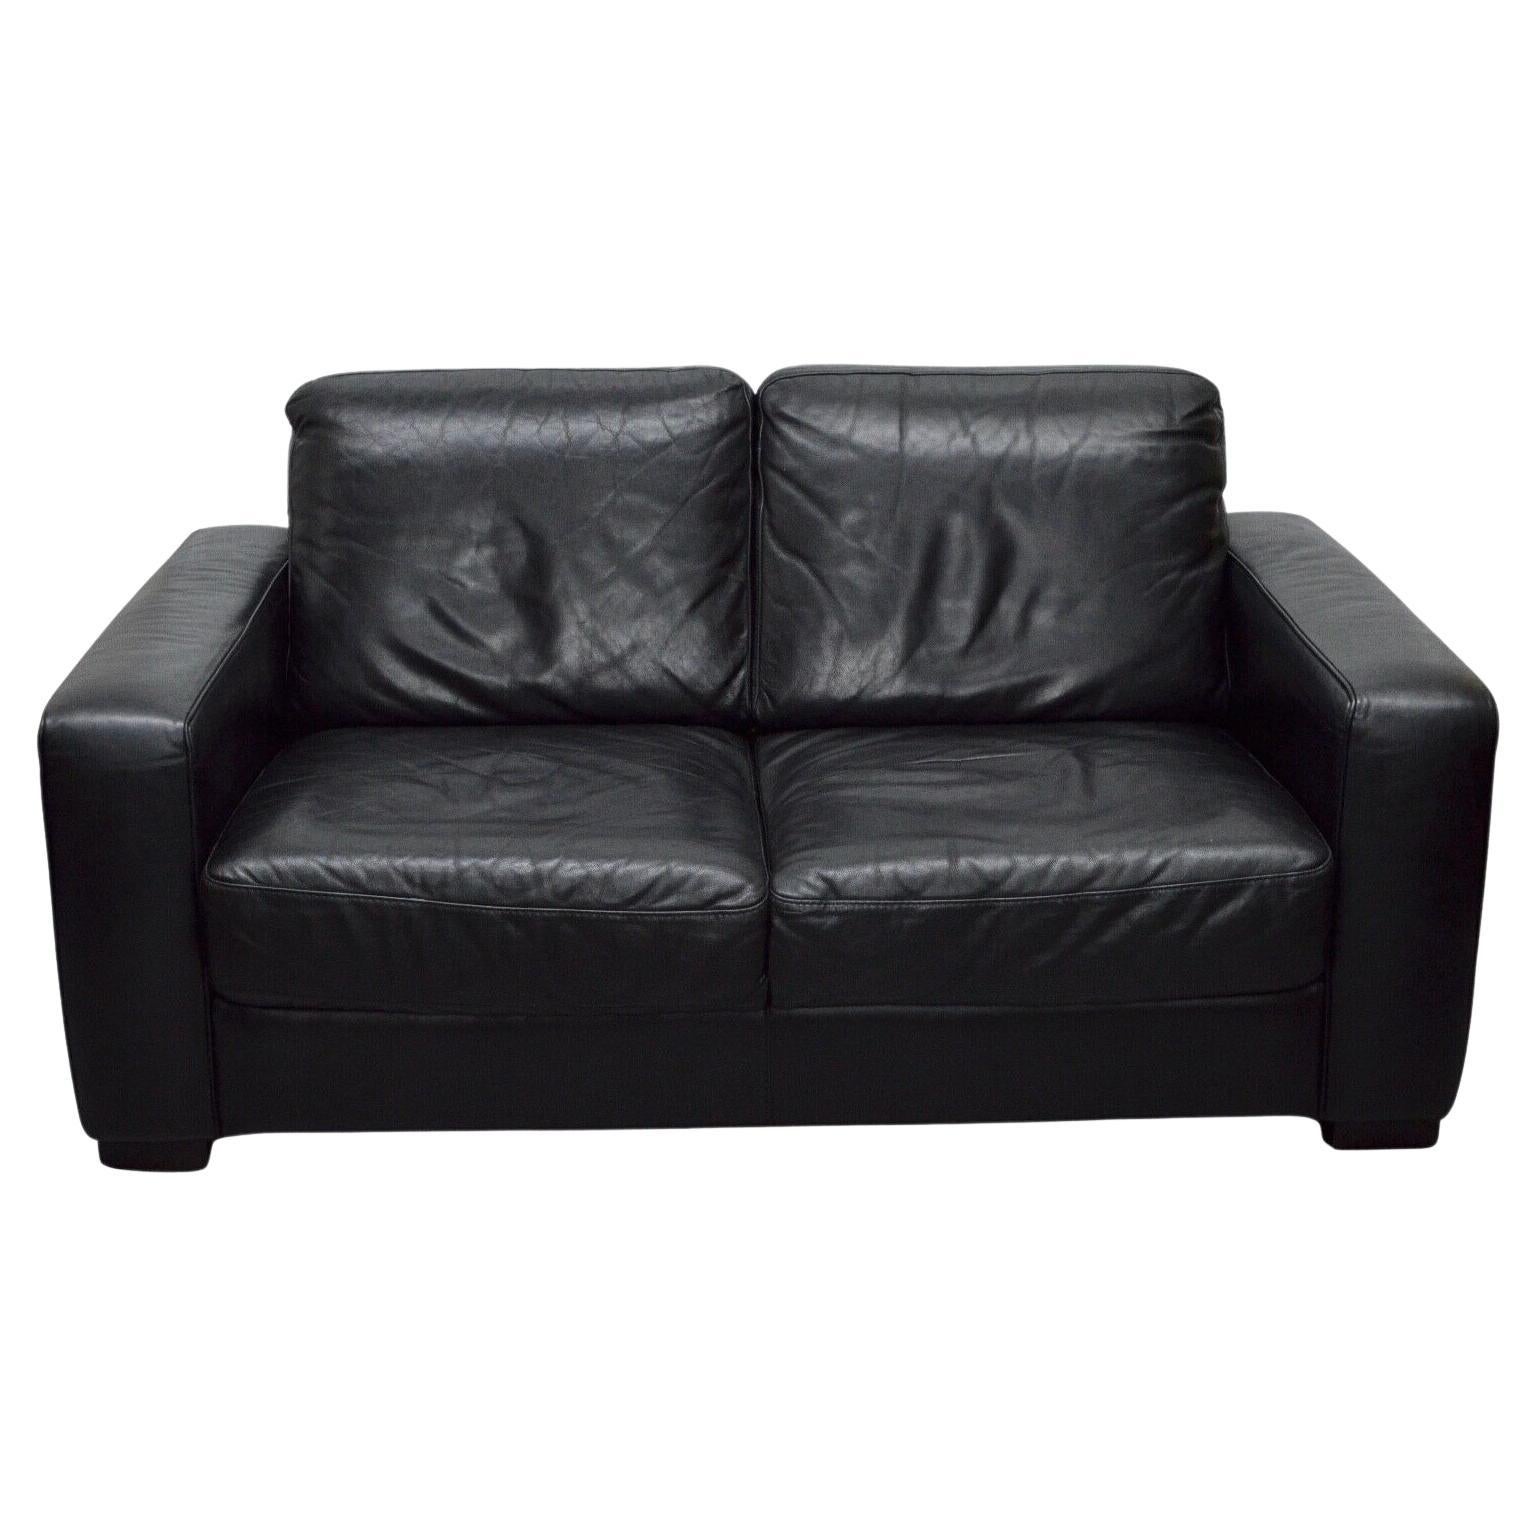 1 of 2 FINE NATUZZI BLACK LEATHER TWO SEATER SOFAS MATCING ARMCHAIR AVAILABLE